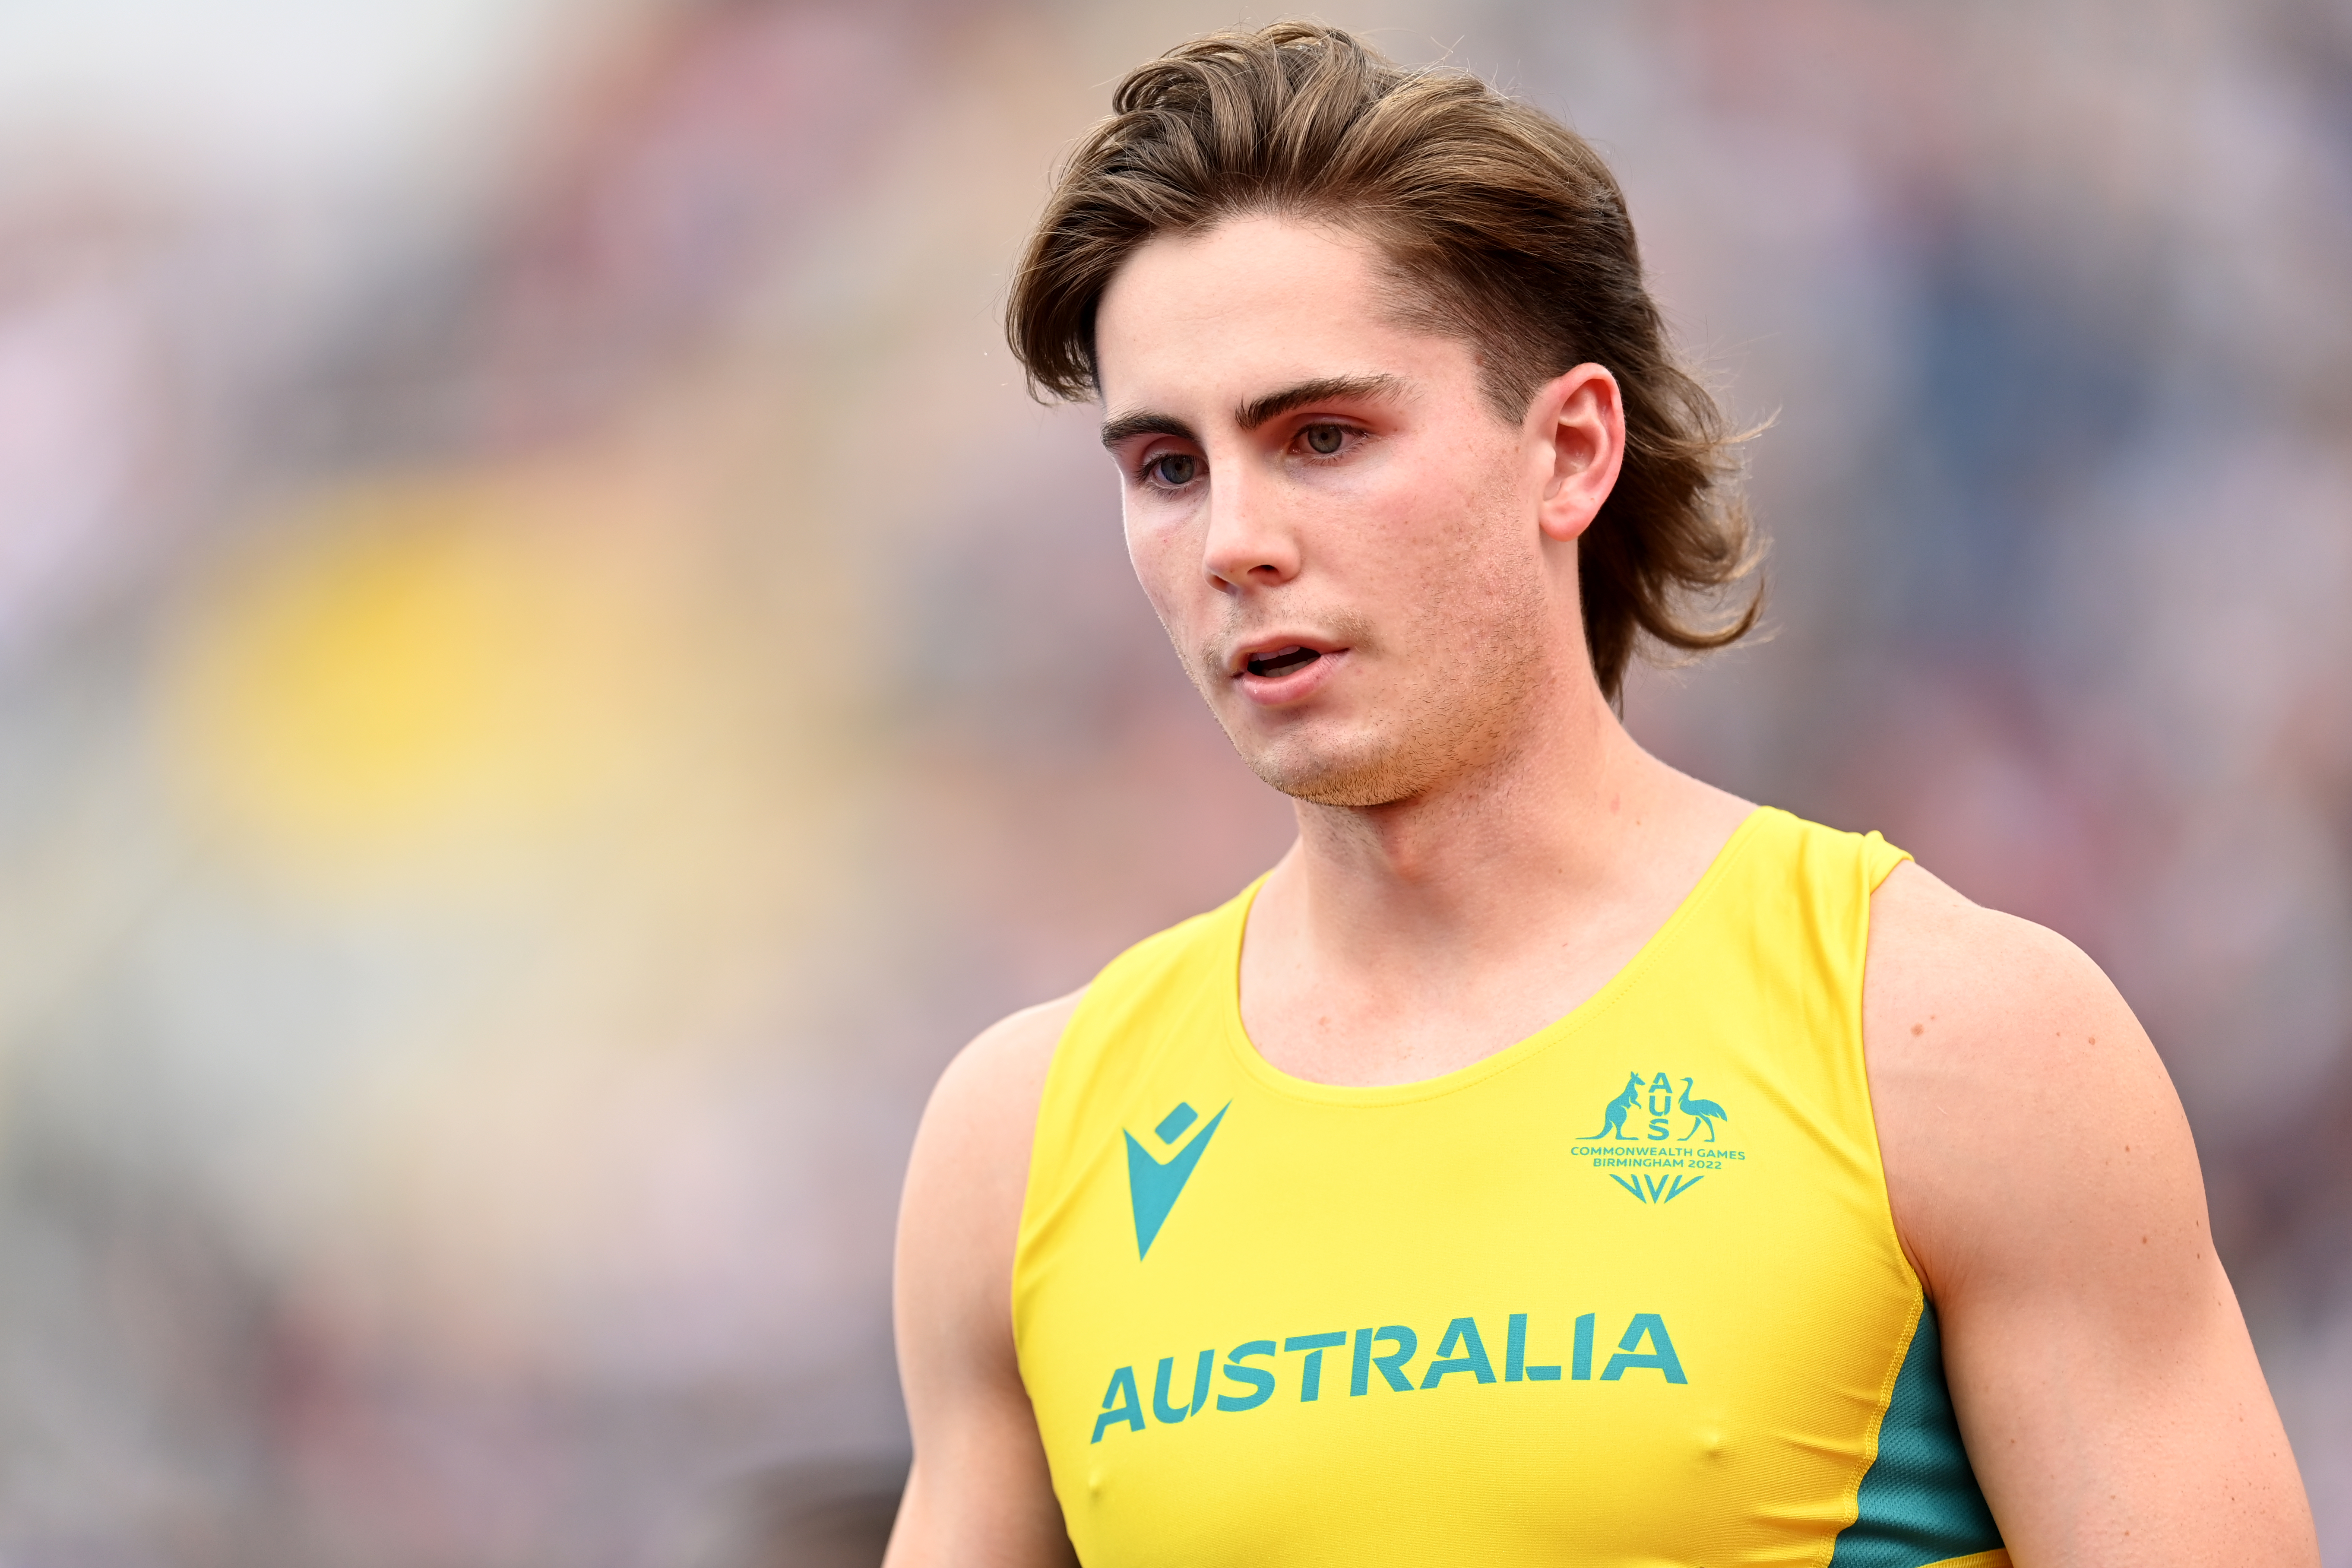 Rohan Browning of Team Australia reacts after qualifying in the Men's 100m Round 1 heats on day five of the Birmingham 2022 Commonwealth Games at Alexander Stadium on August 02, 2022 on the Birmingham, England. (Photo by David Ramos/Getty Images)